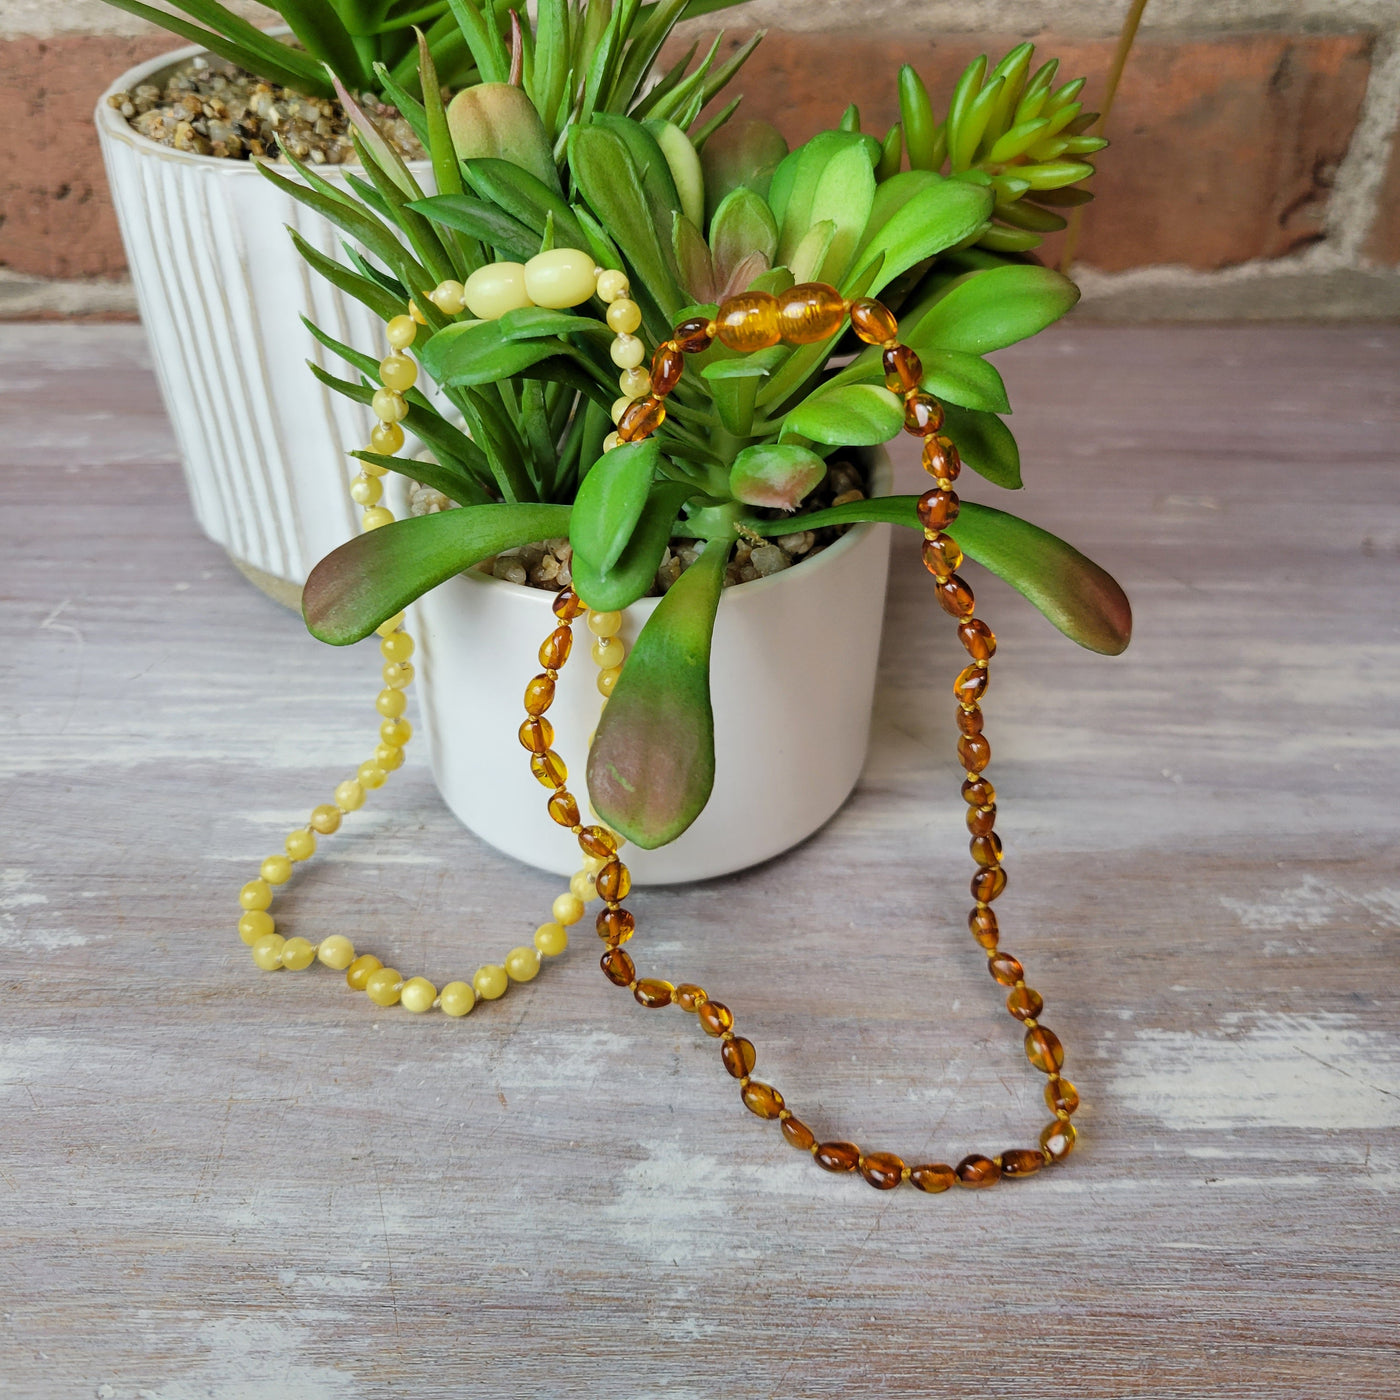 Amber Baby Teething Necklace - Teething Necklace